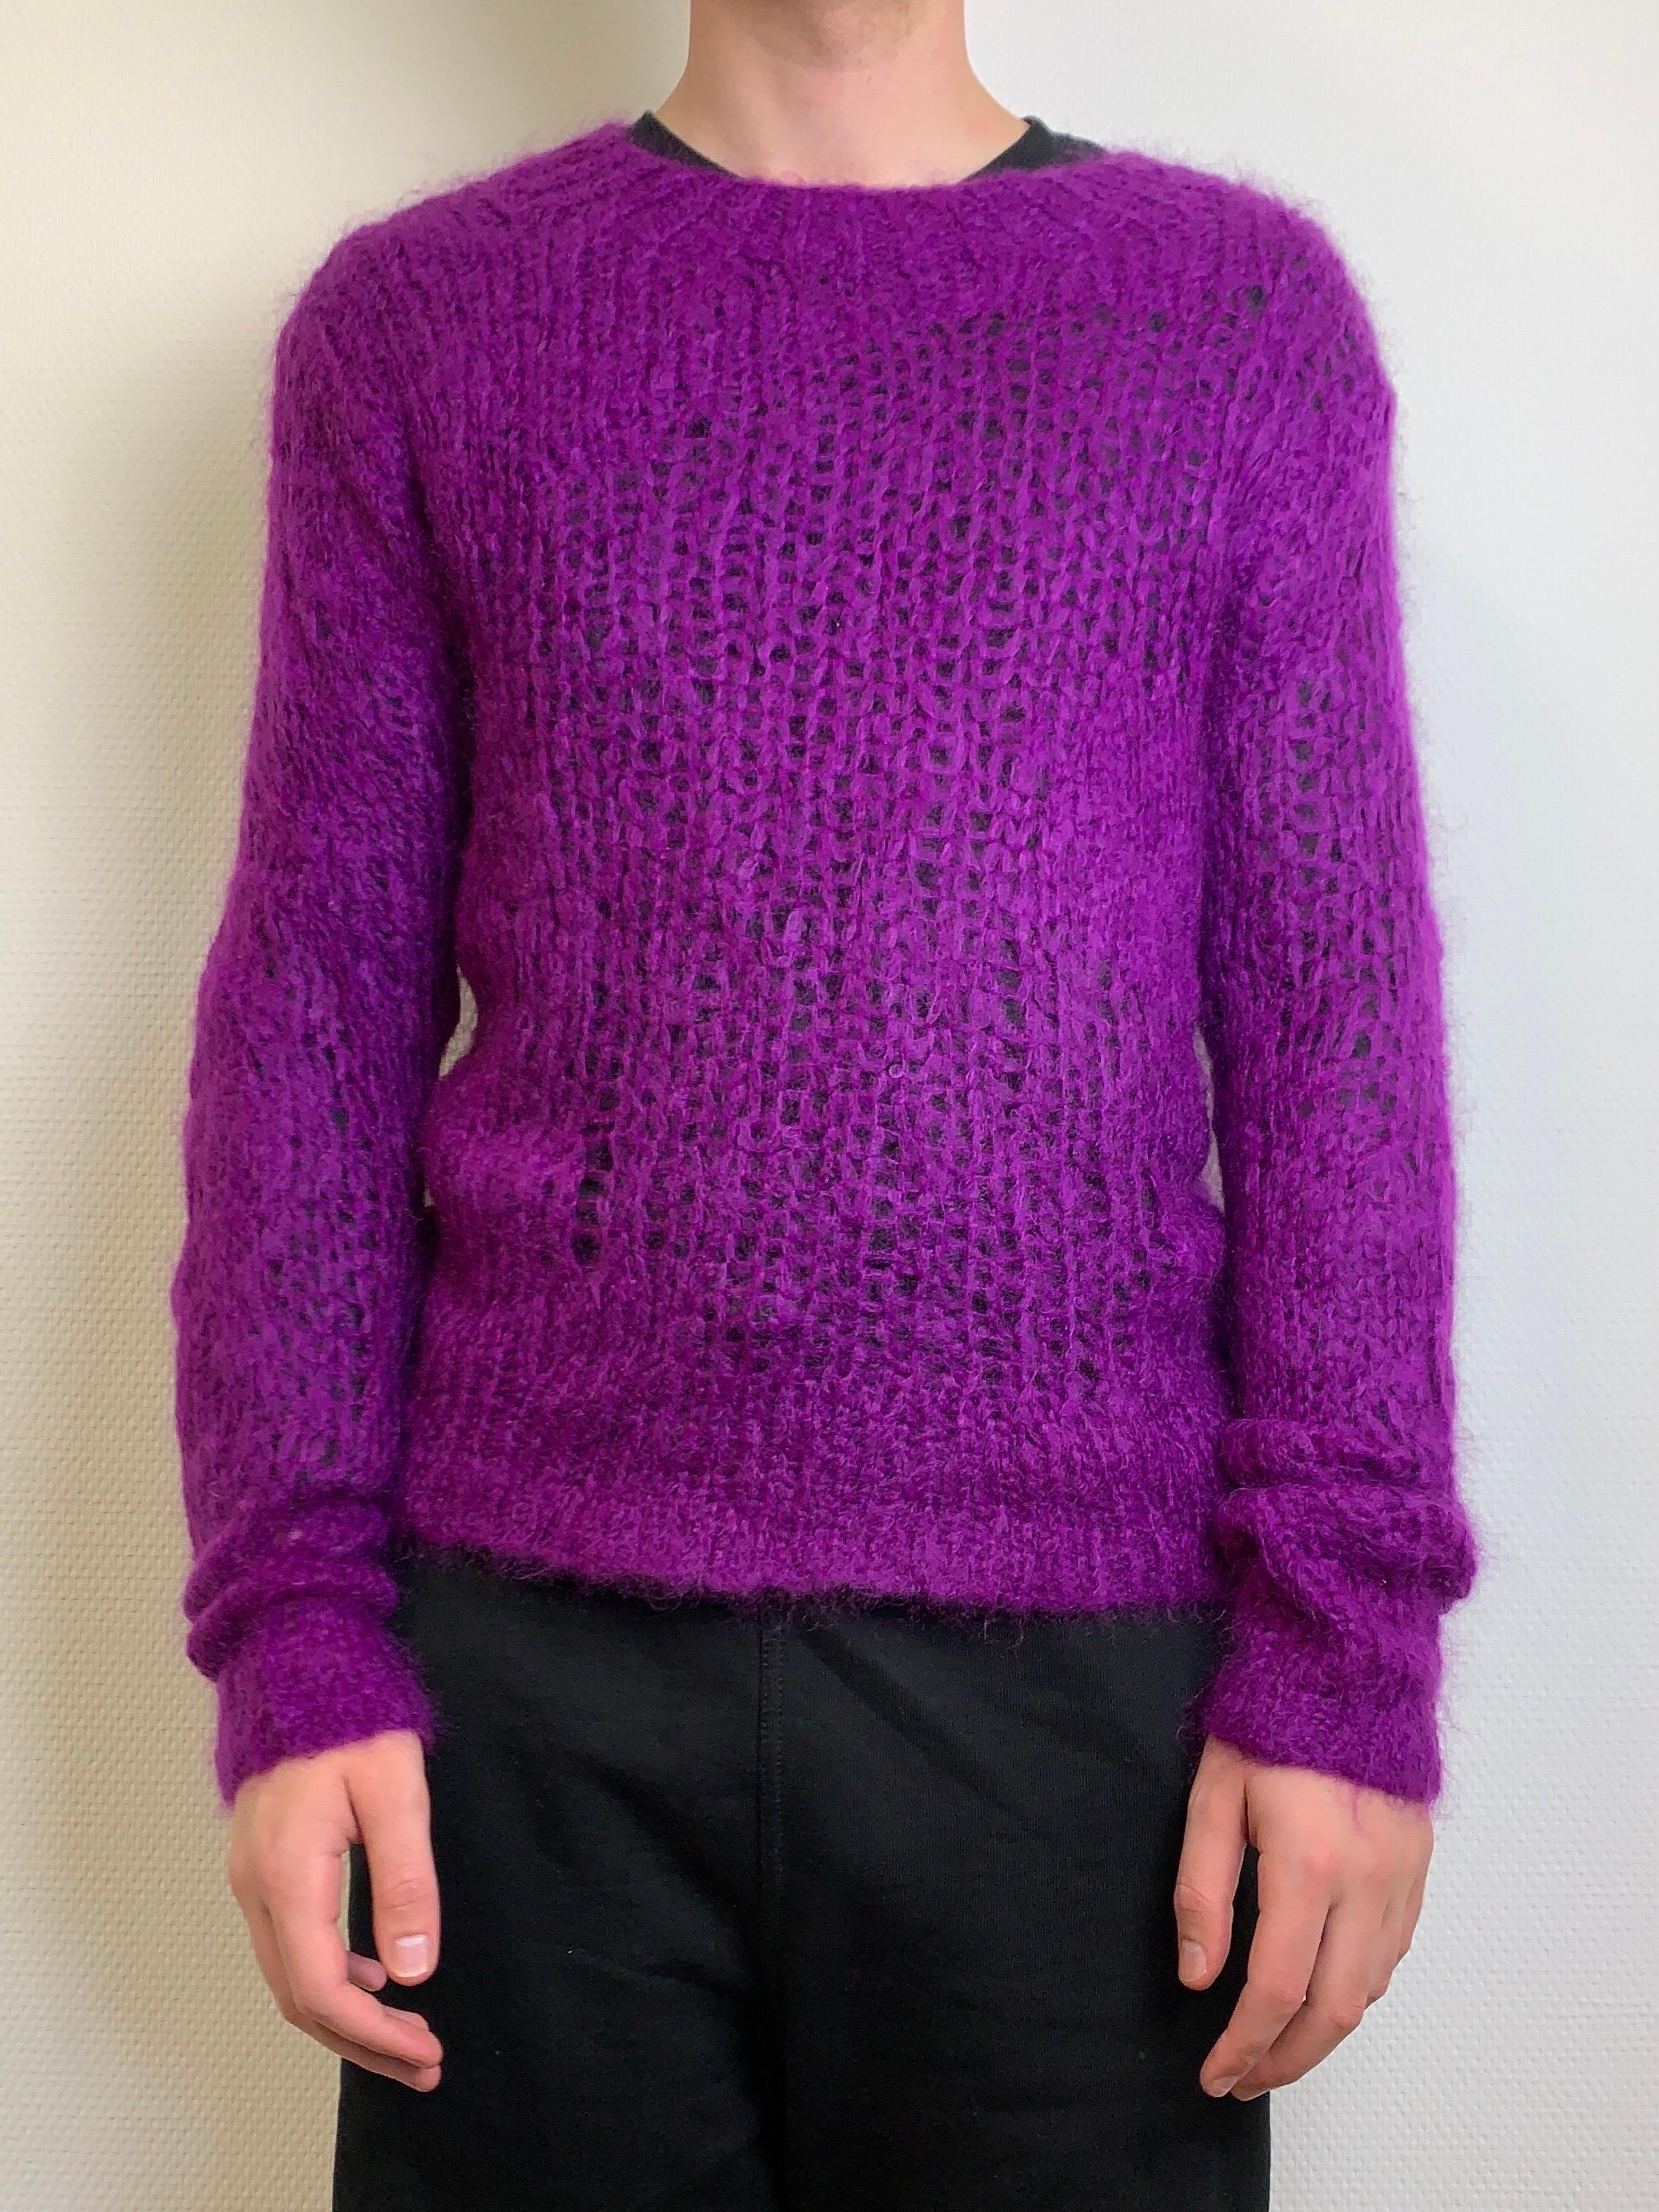 Helmut Lang riot loose mohair knit purple In Excellent Condition For Sale In Bechtheim, DE